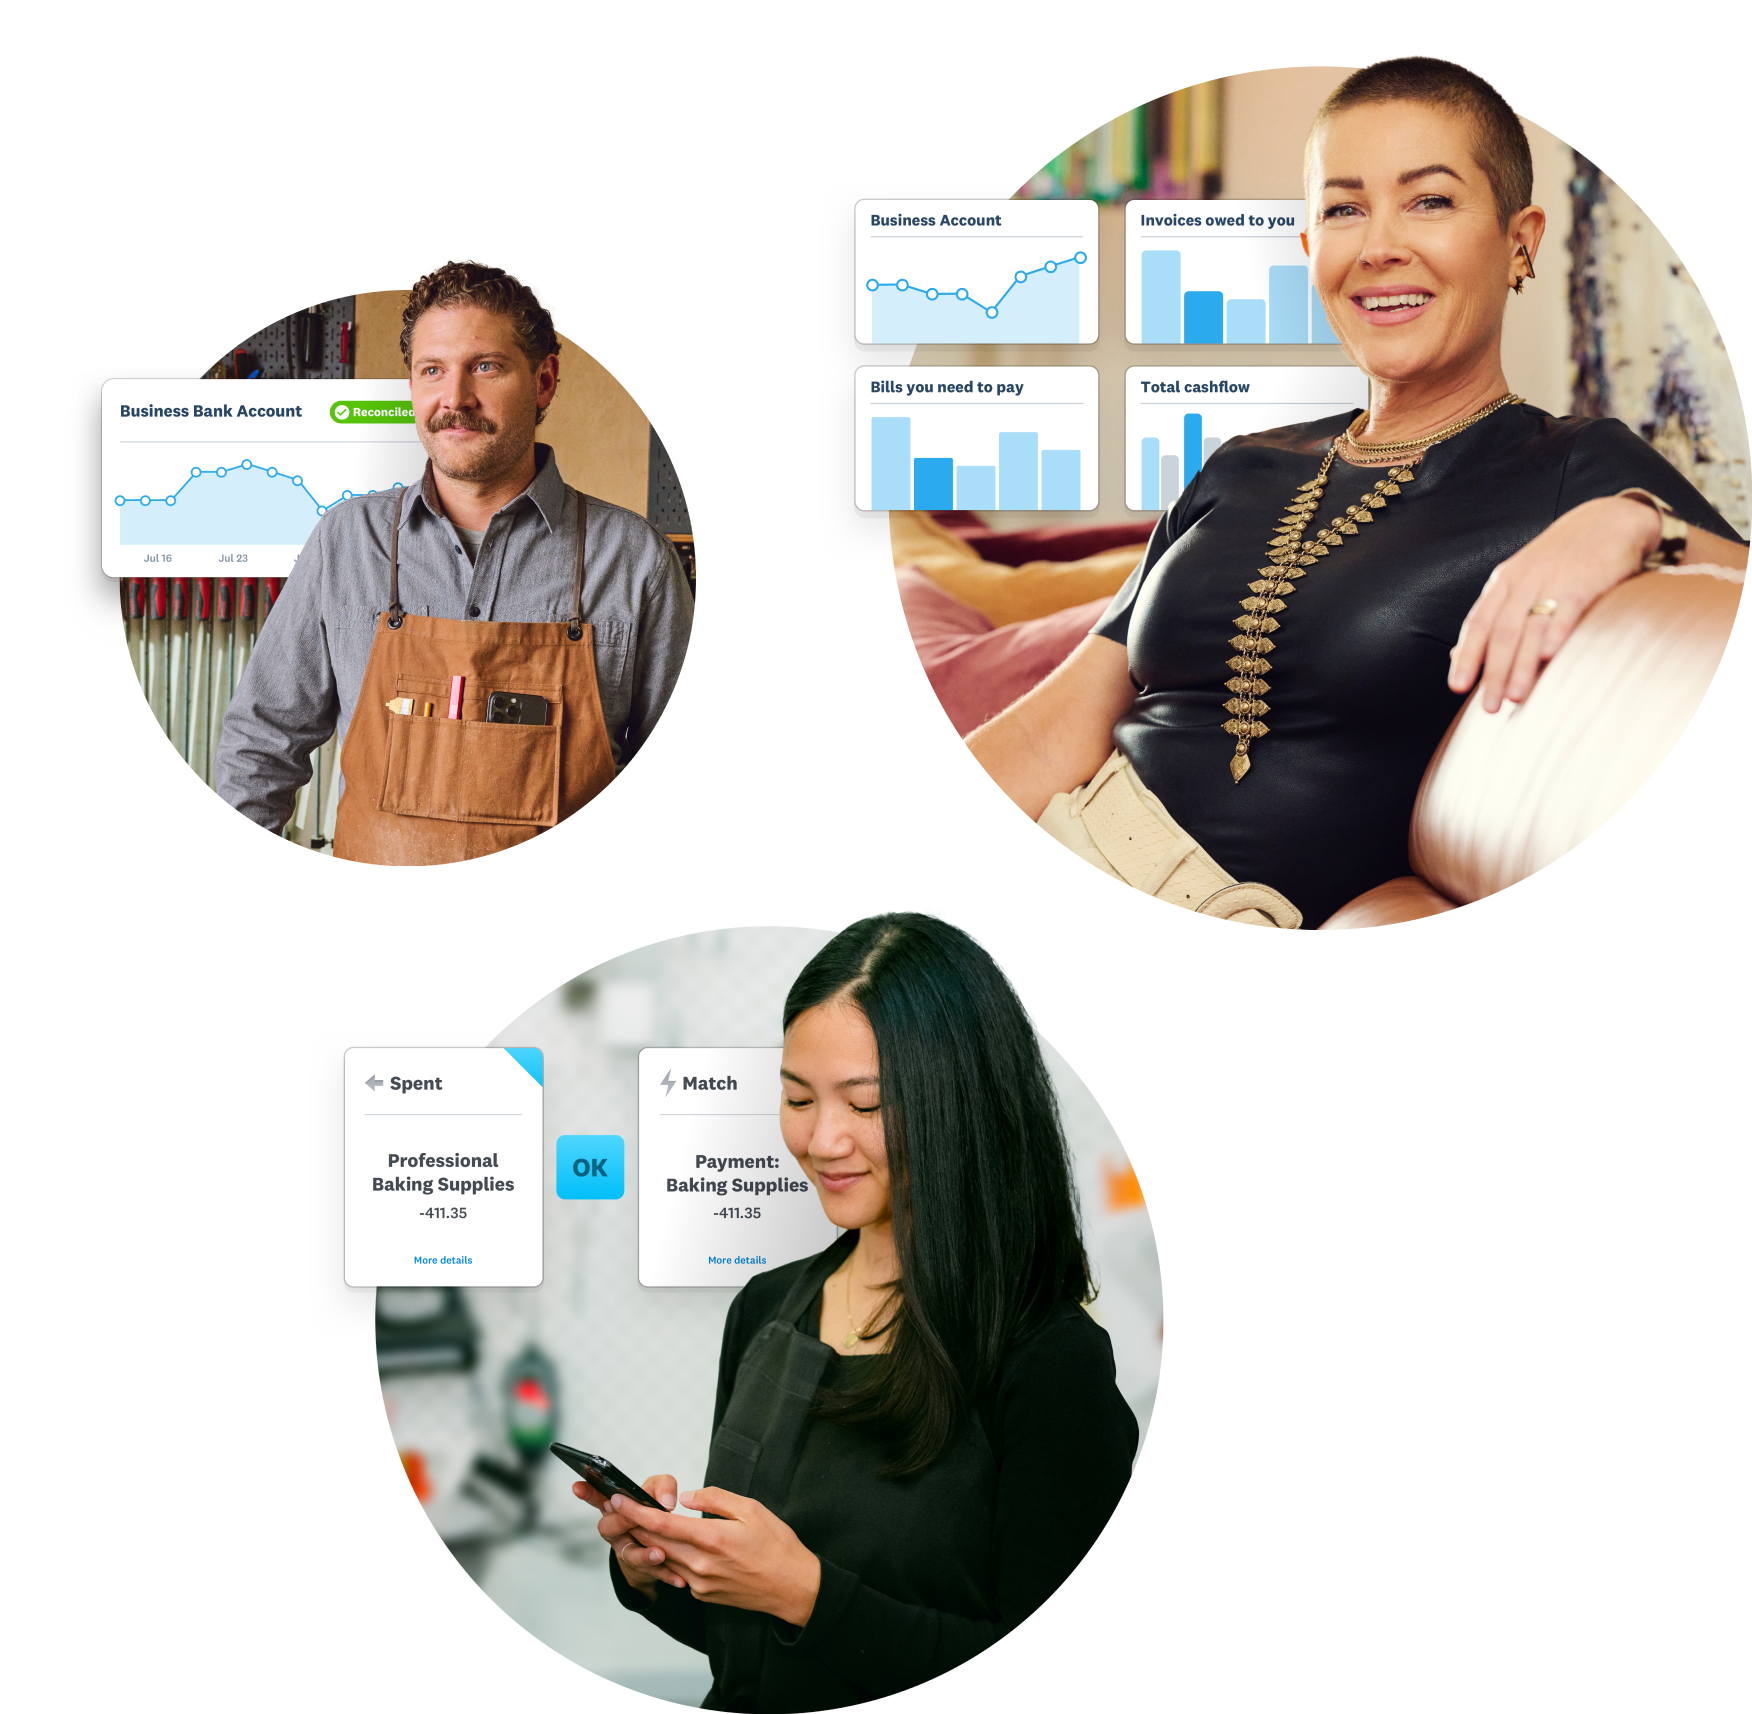 Collection of customers paired with images of the Xero product